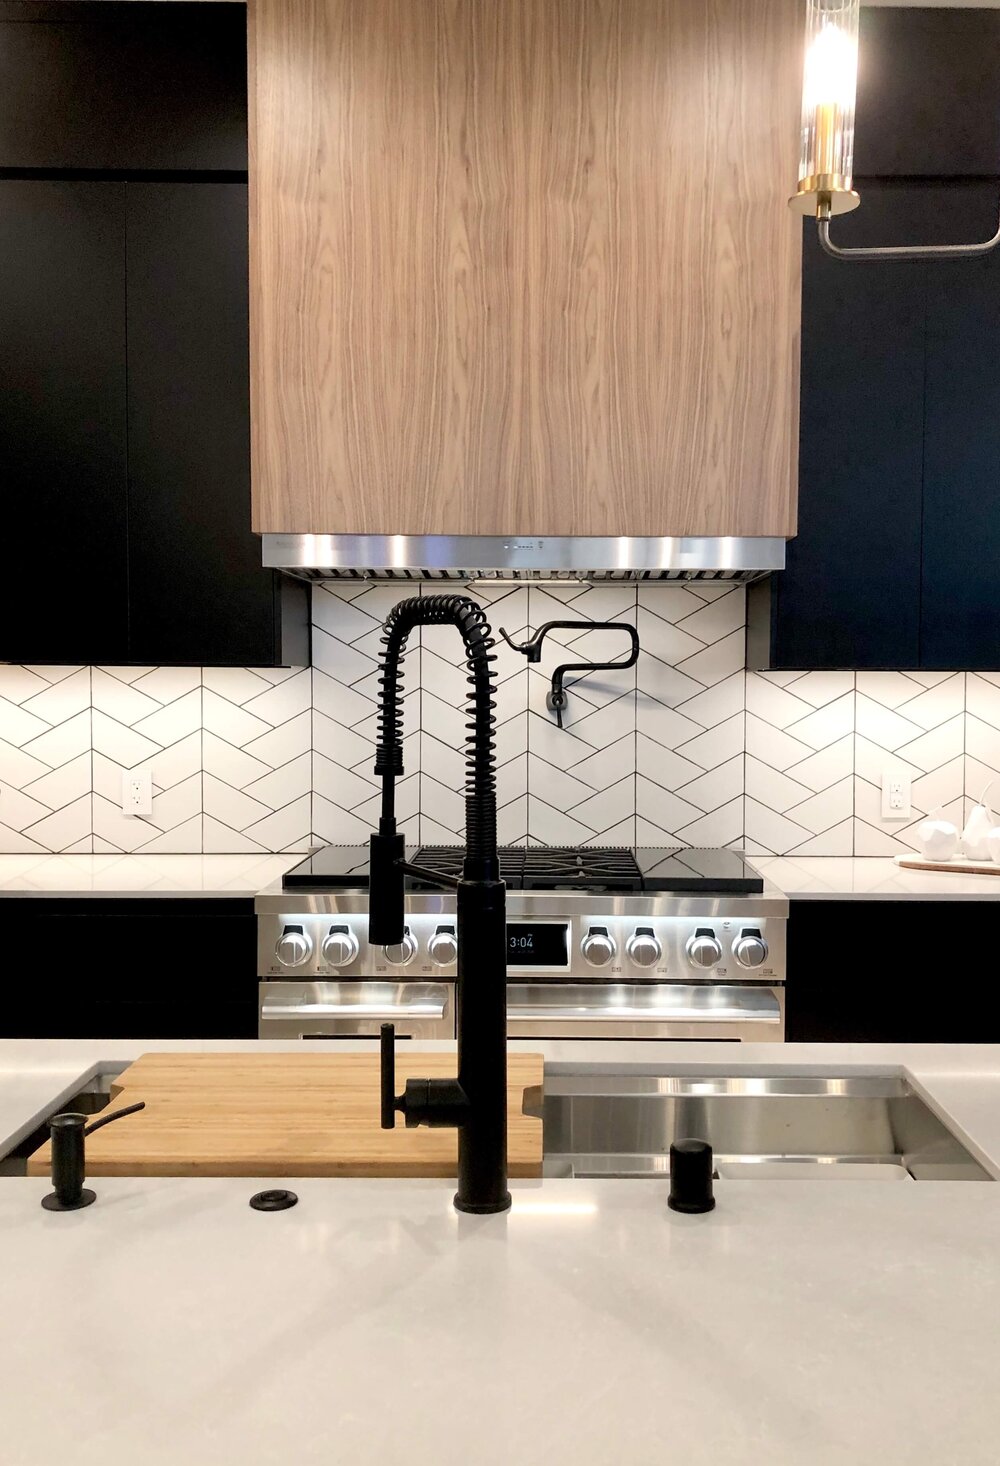 The SKS Appliances range with sous vide cooking takes center stage under the contemporary wood venthood in this contemporary kitchen in The New American Remodel TNAR | #remodeling #remodel #kitchenideas #kitchendesign